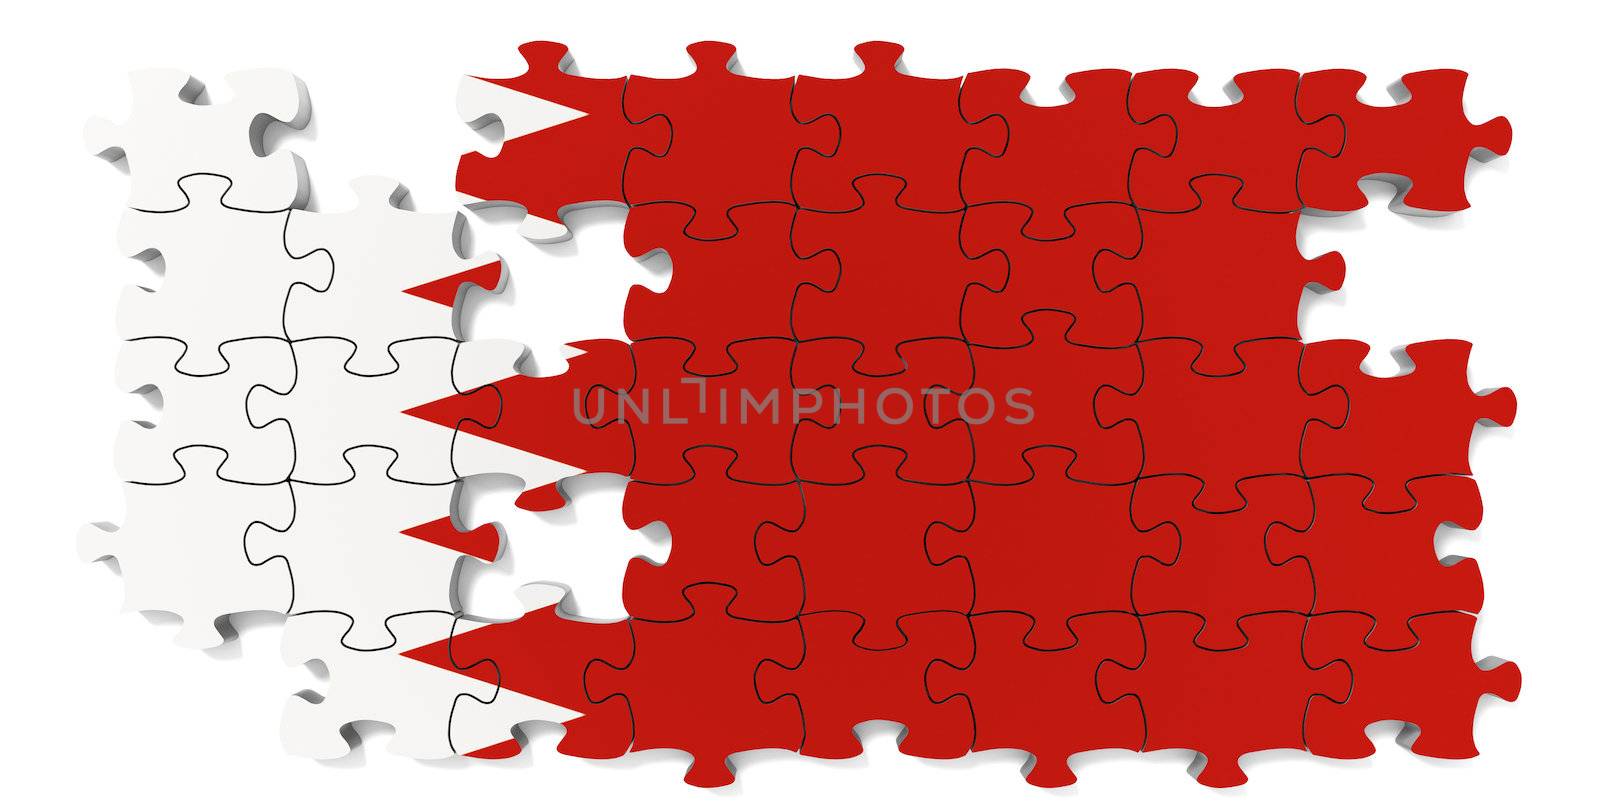 Flag jigsaw puzzle with missing pieces.